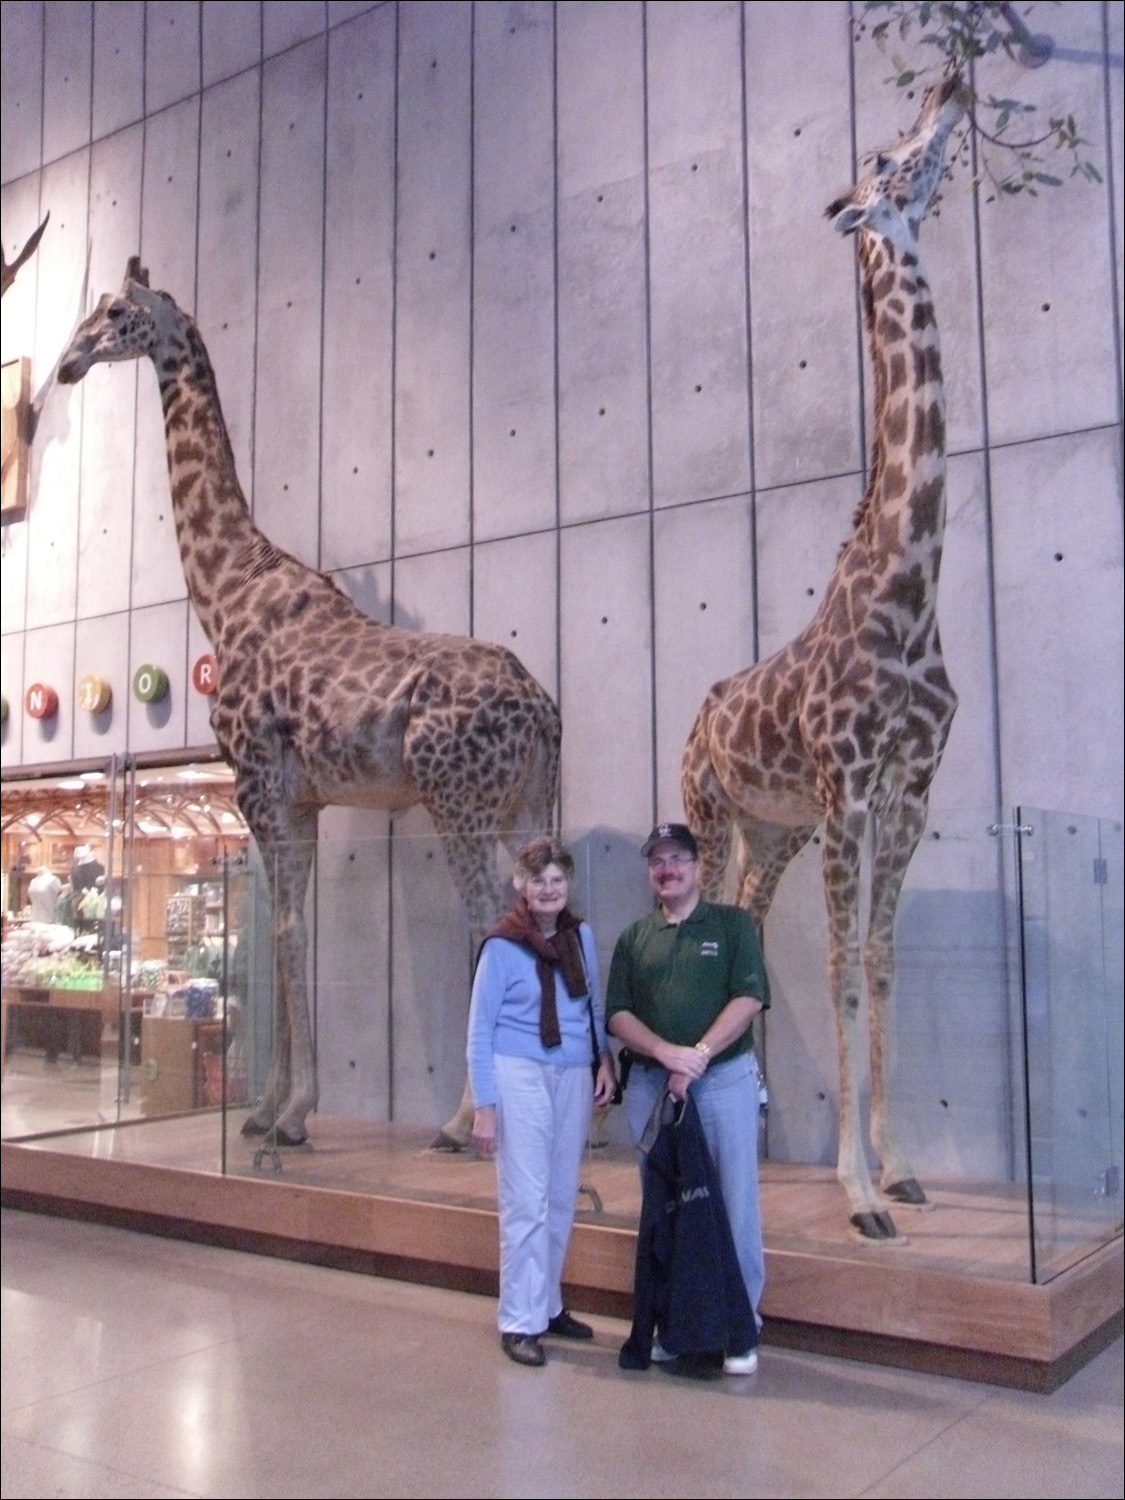 David Burrall and Anne McCarthy with giraffes